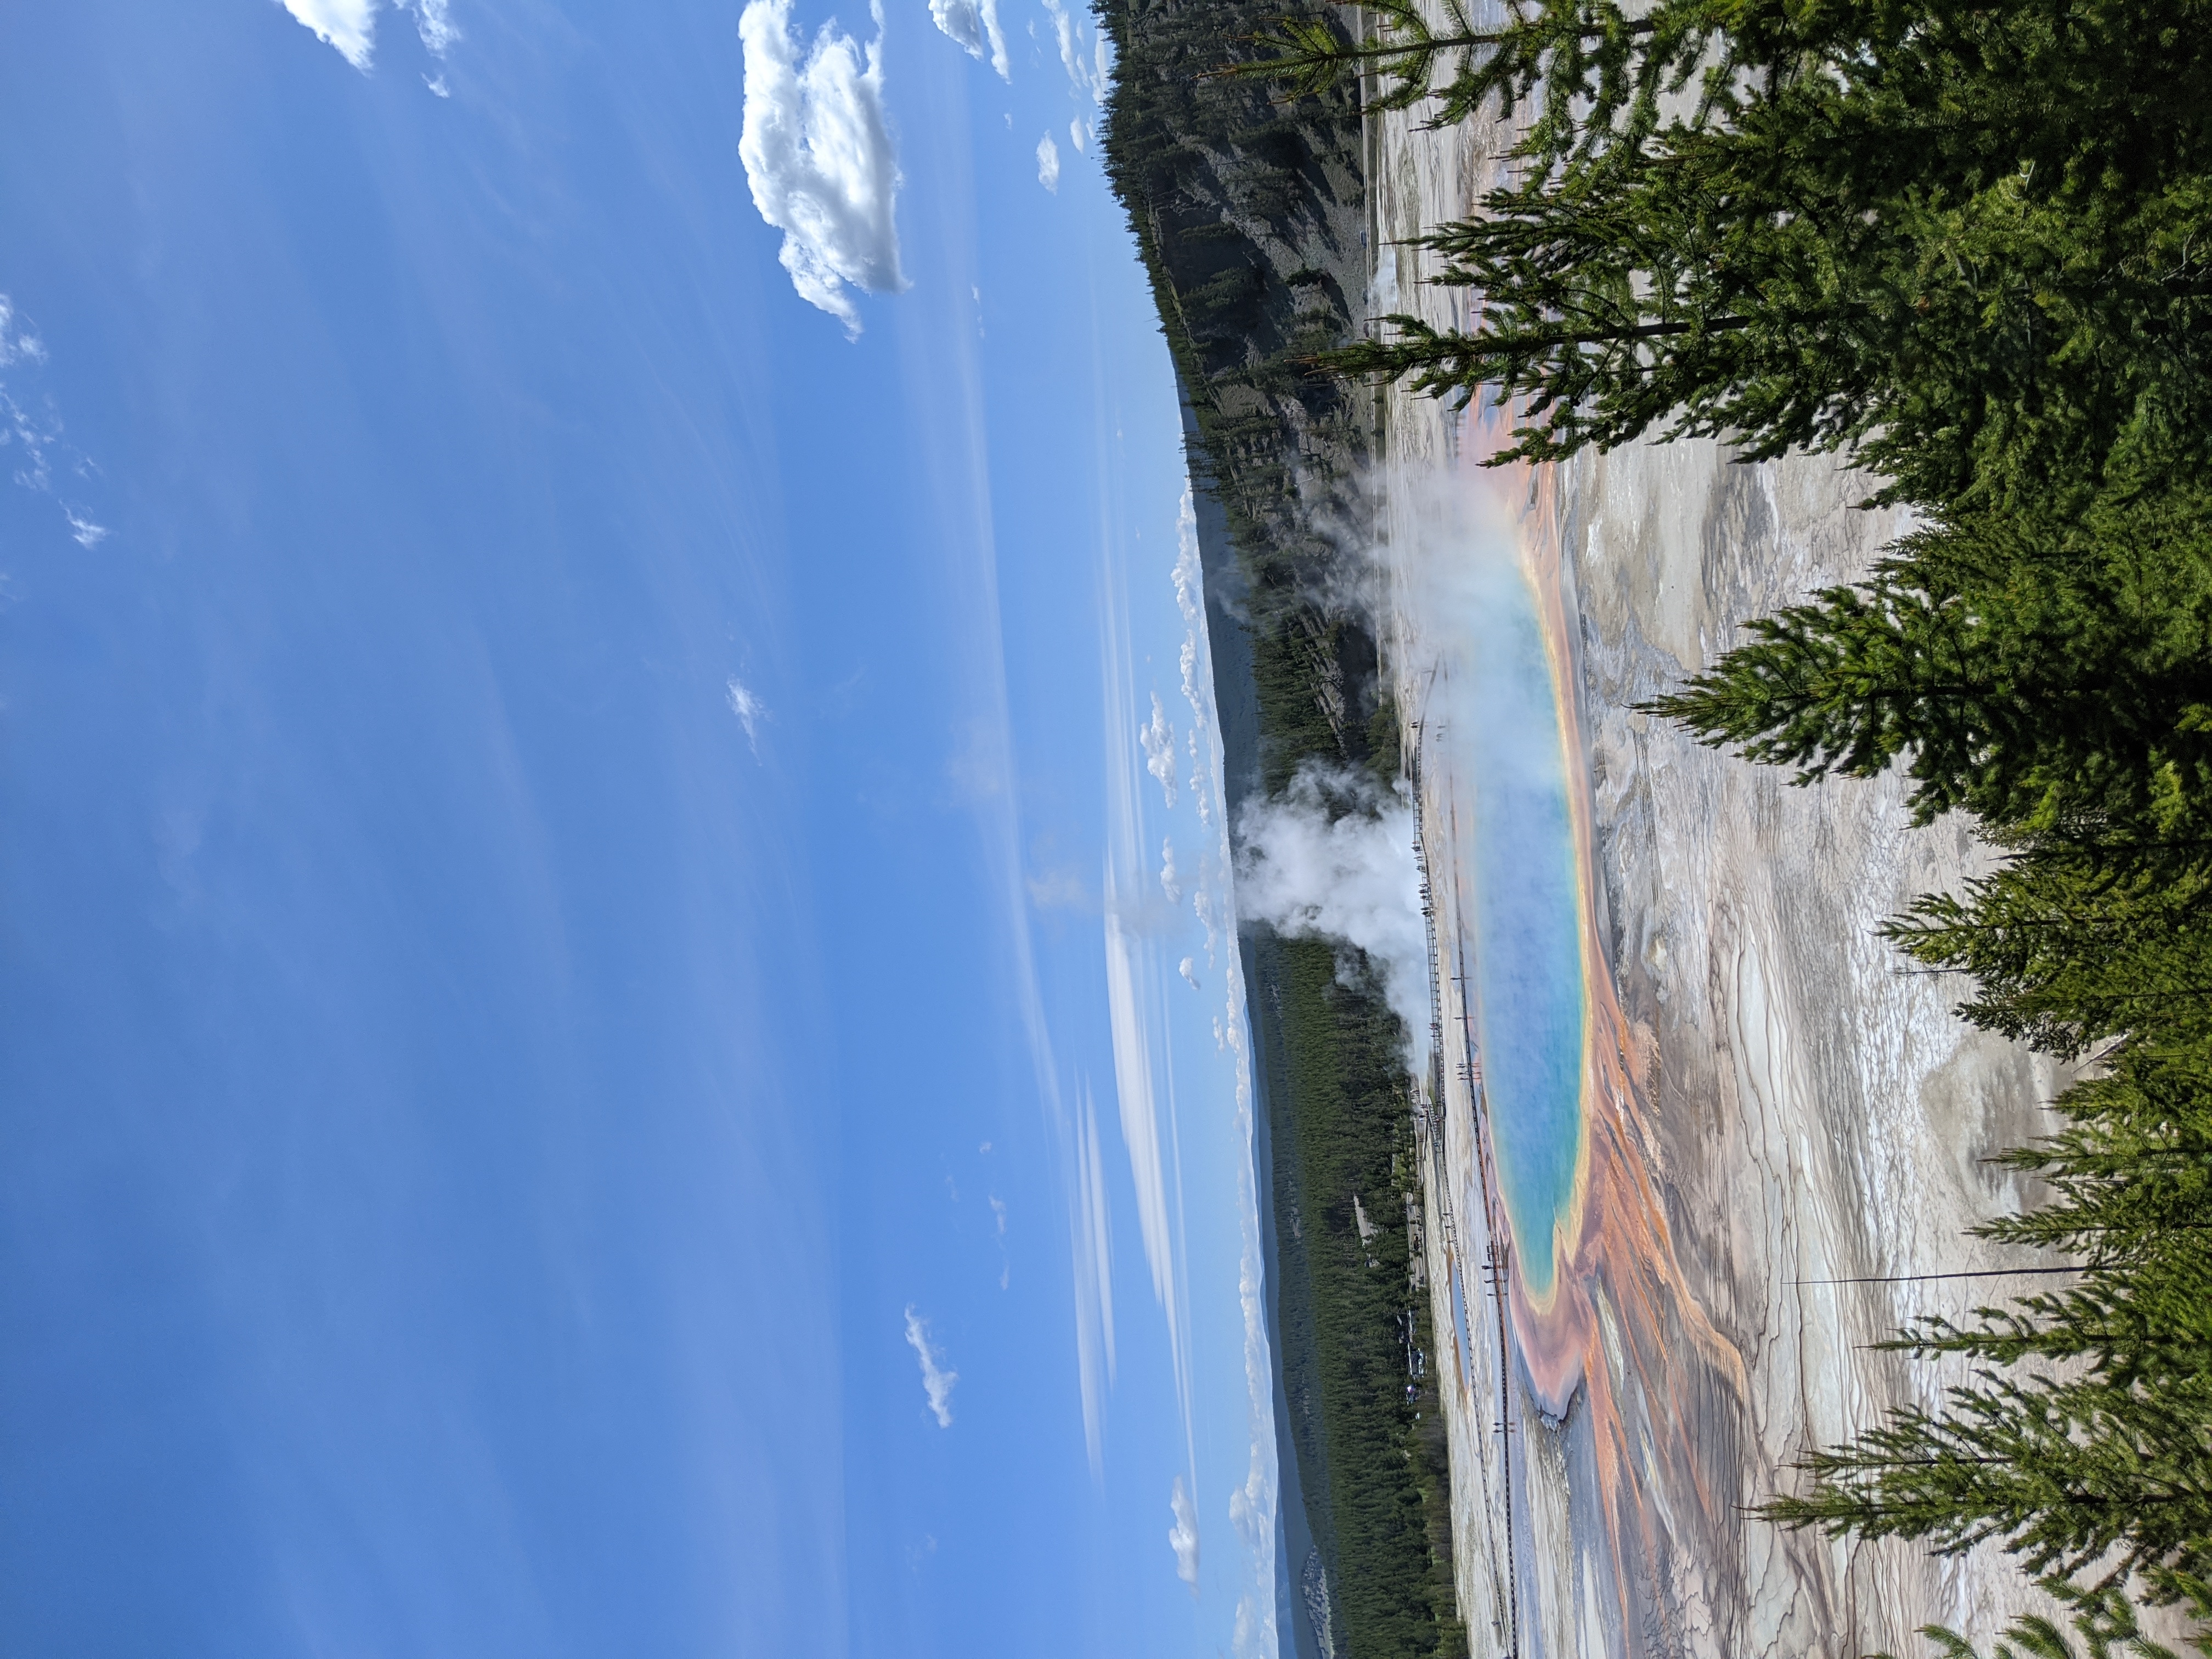 Visiting Yellowstone with the help of the Gypsy Guide app during Covid in 2020. 